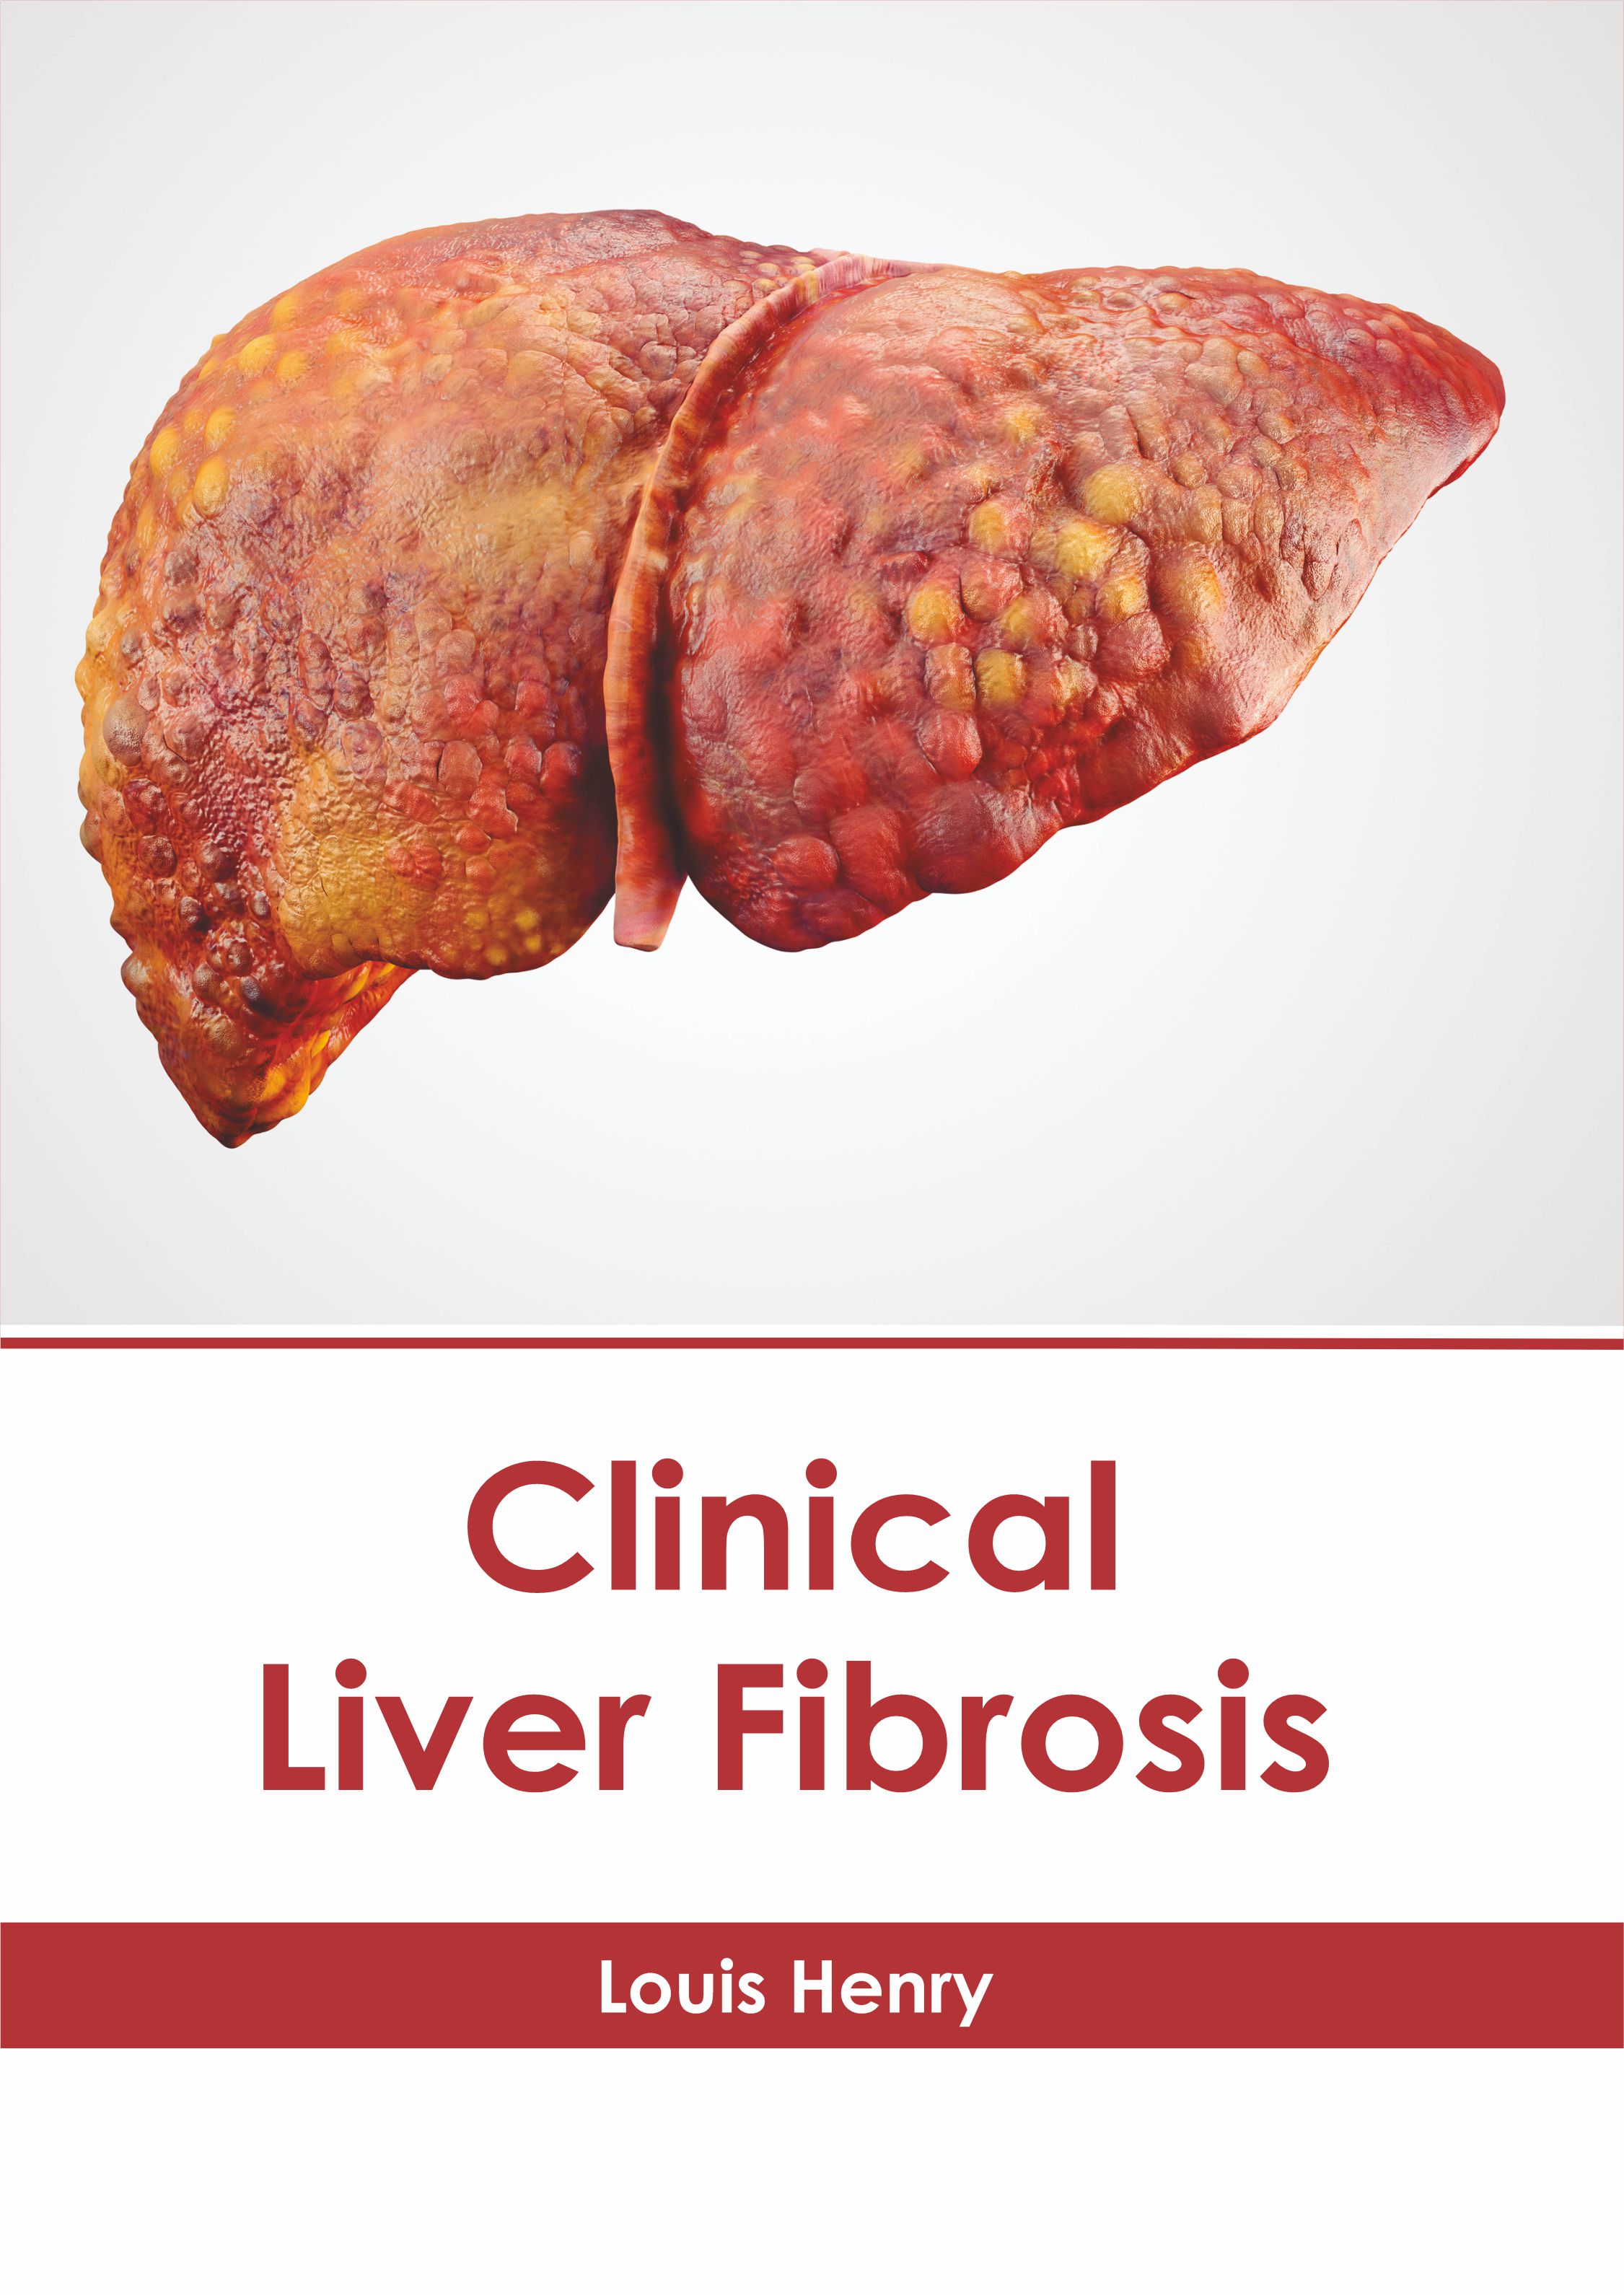 

exclusive-publishers/american-medical-publishers/clinical-liver-fibrosis-9781639271887